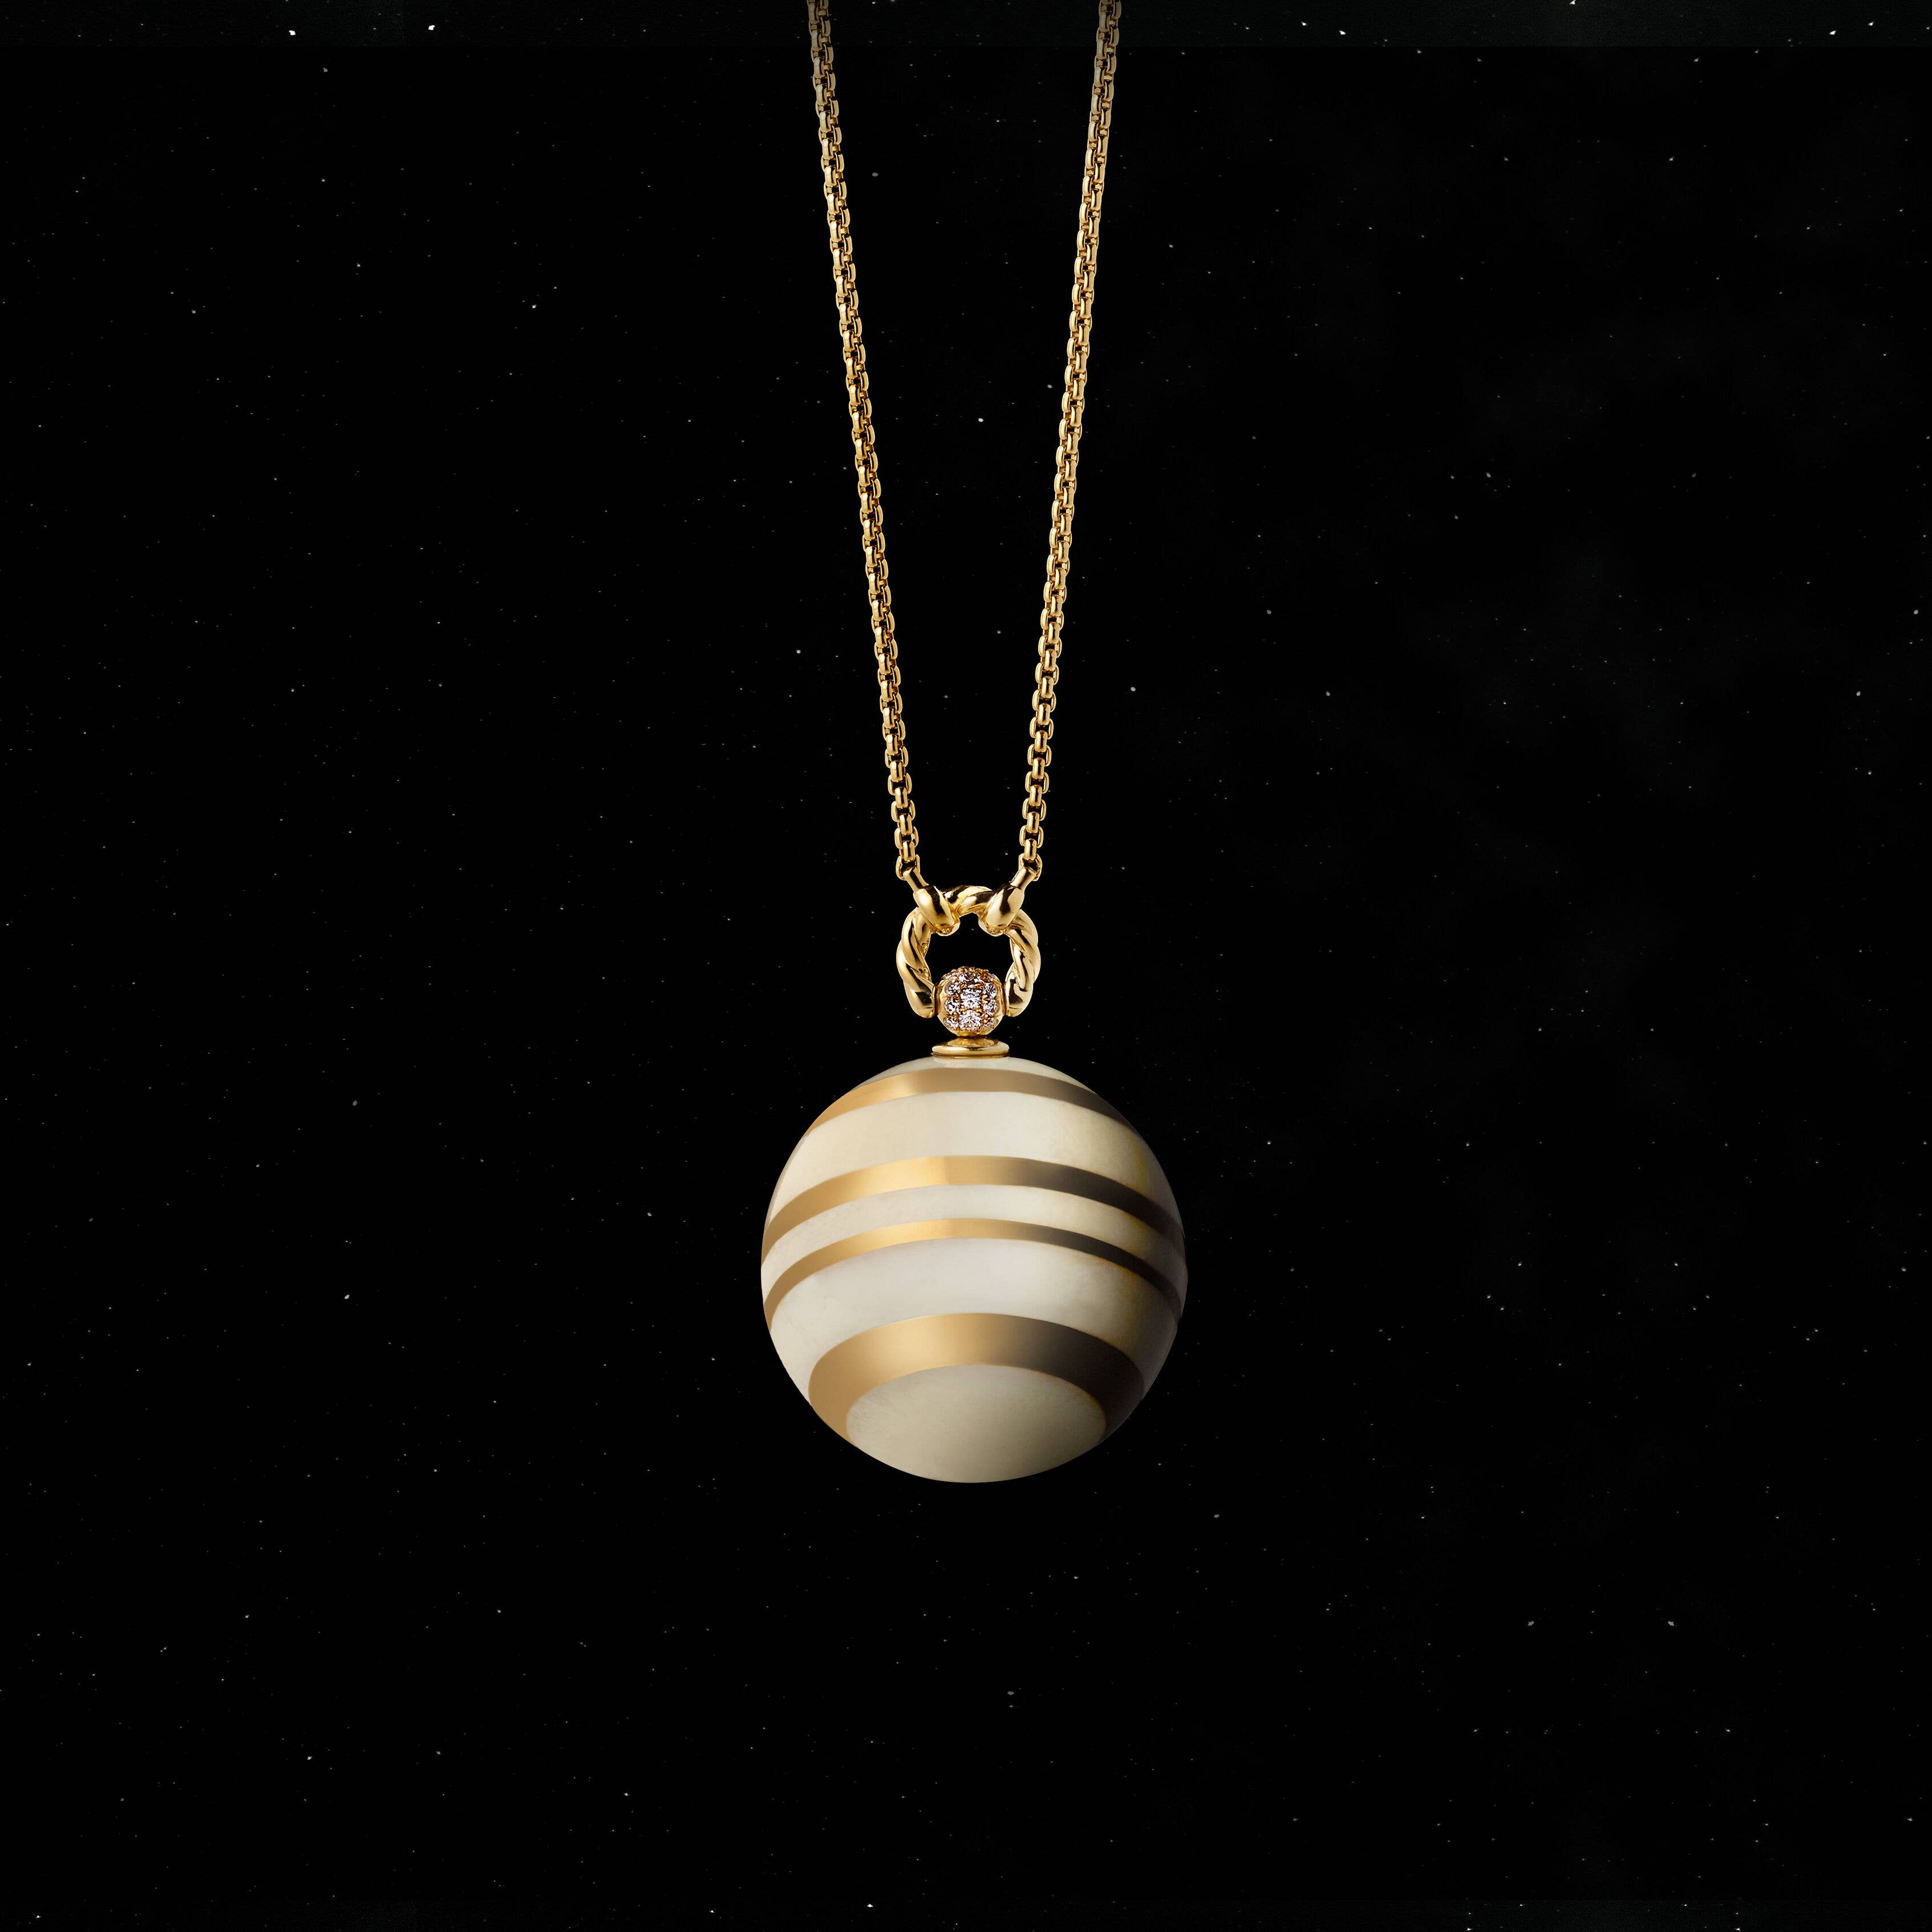 Solari Venus Pendant Necklace in 18K Yellow Gold with White Agate and Pavé Diamonds